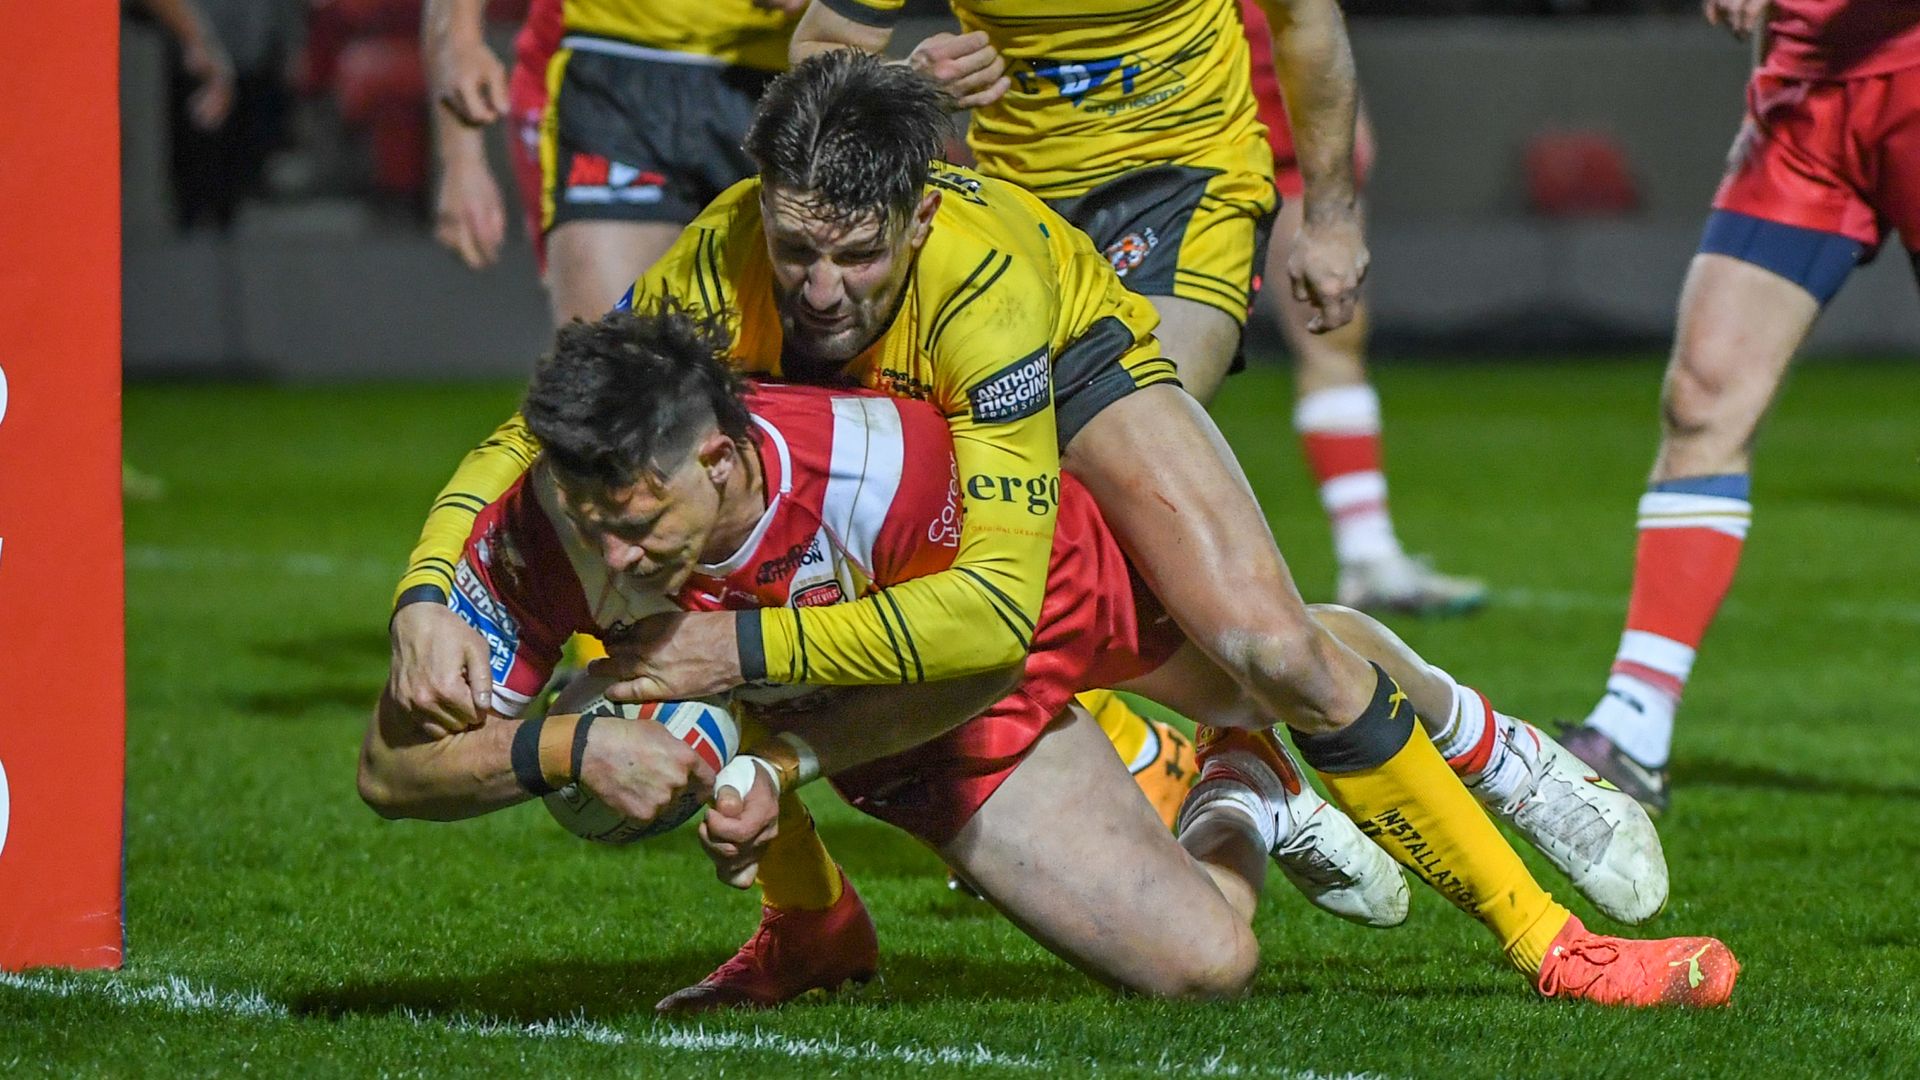 Play-off chasing Red Devils battle past struggling Tigers